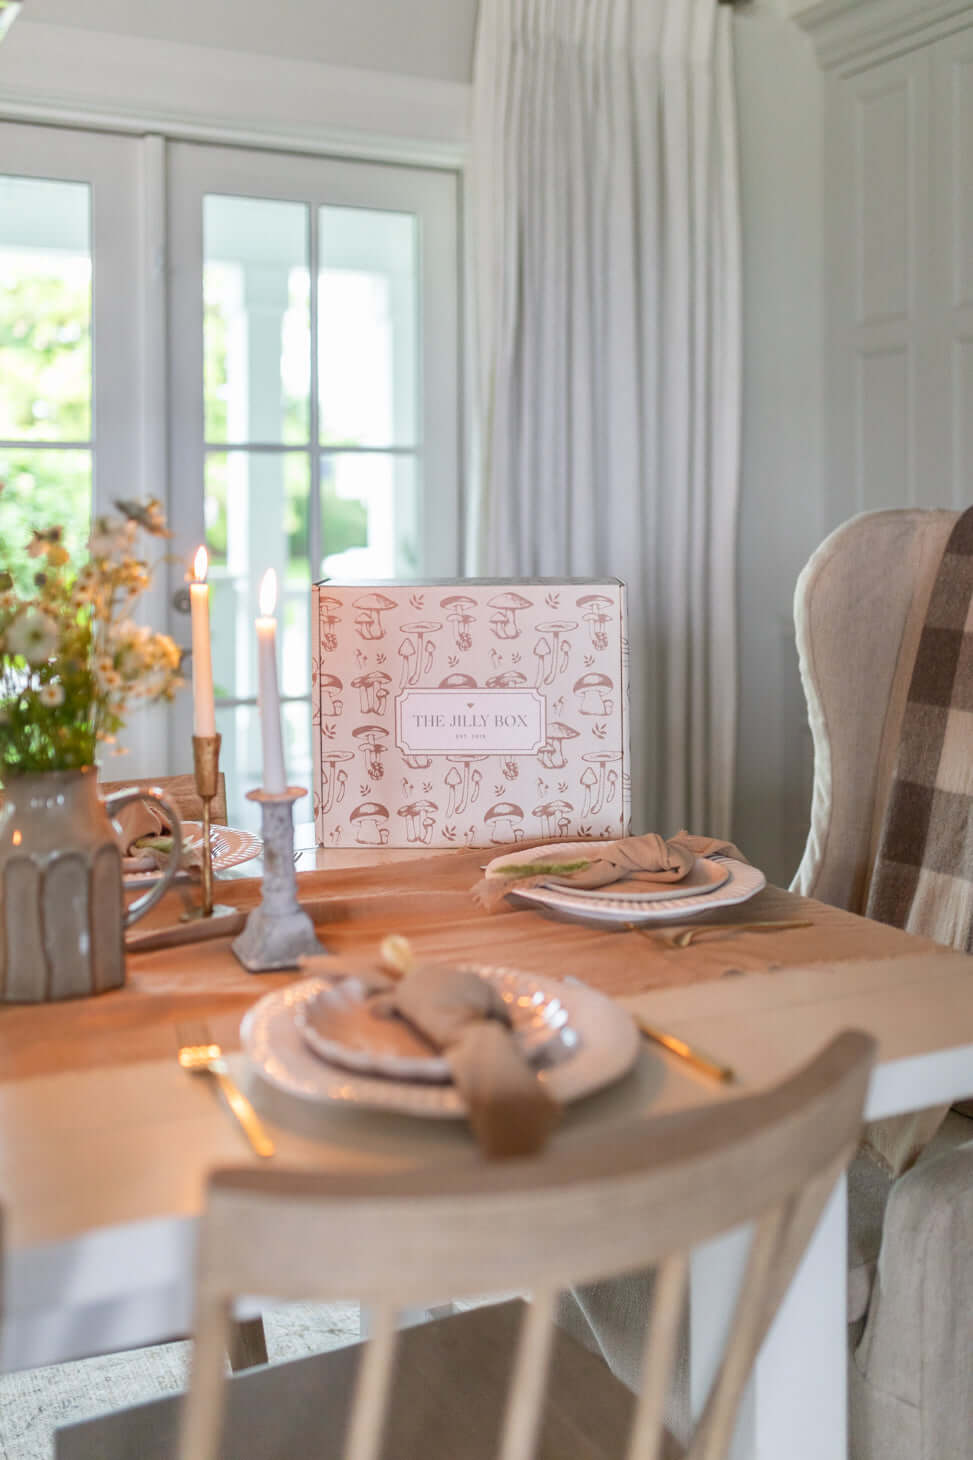 Jilly box home feature of white beachwood table with our linen napkins and table runner set in a farmhouse setting